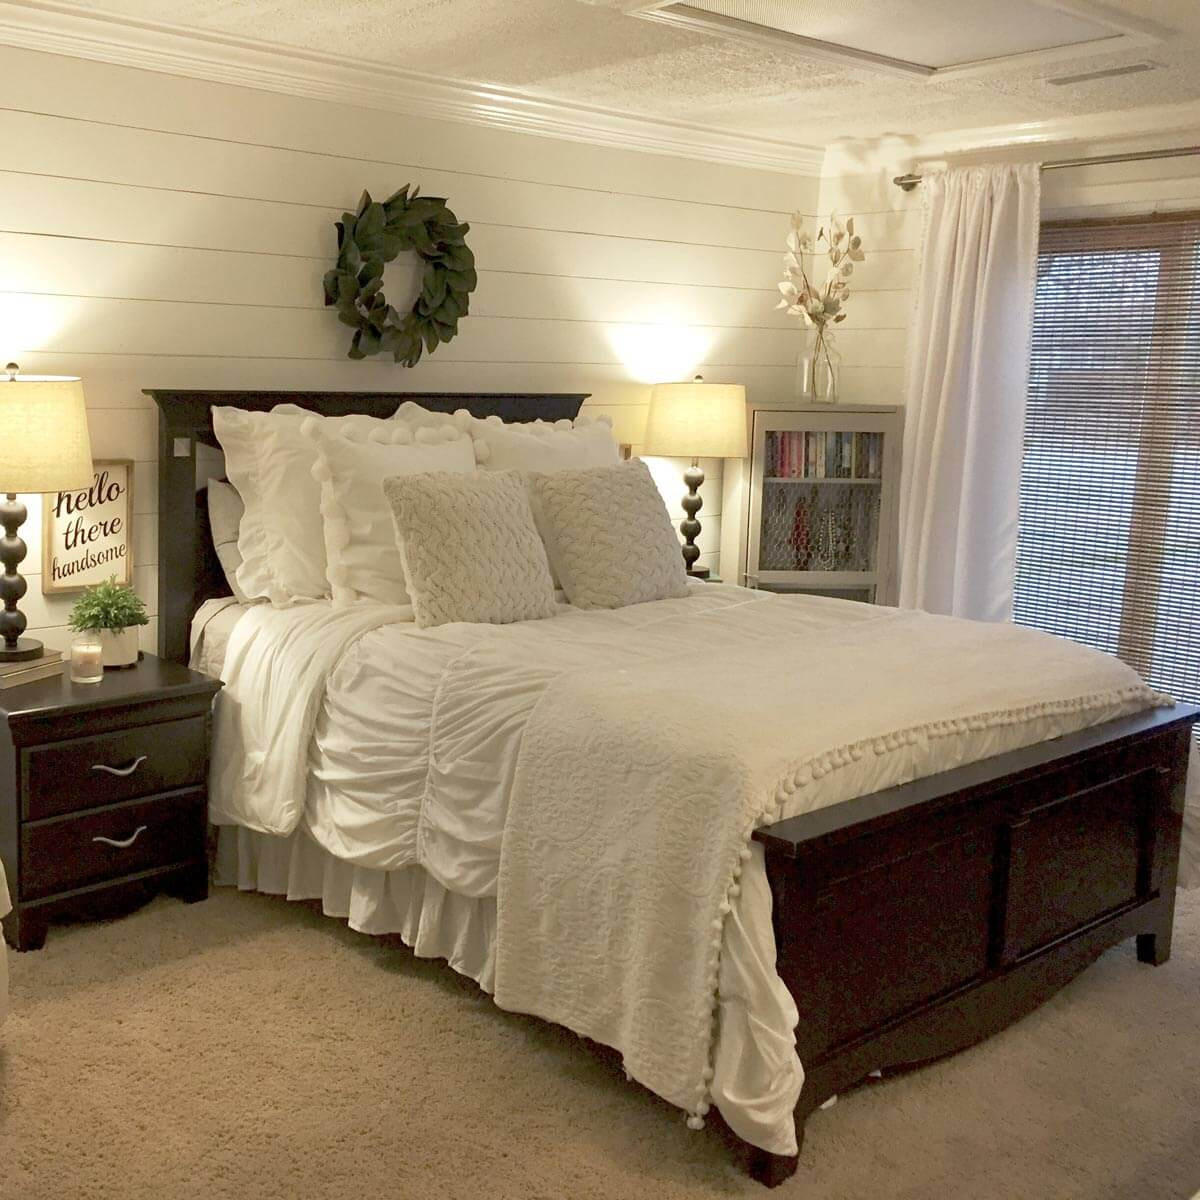 Shiplap Accent Wall Bedroom
 12 Incredible Shiplap Wall Ideas — The Family Handyman